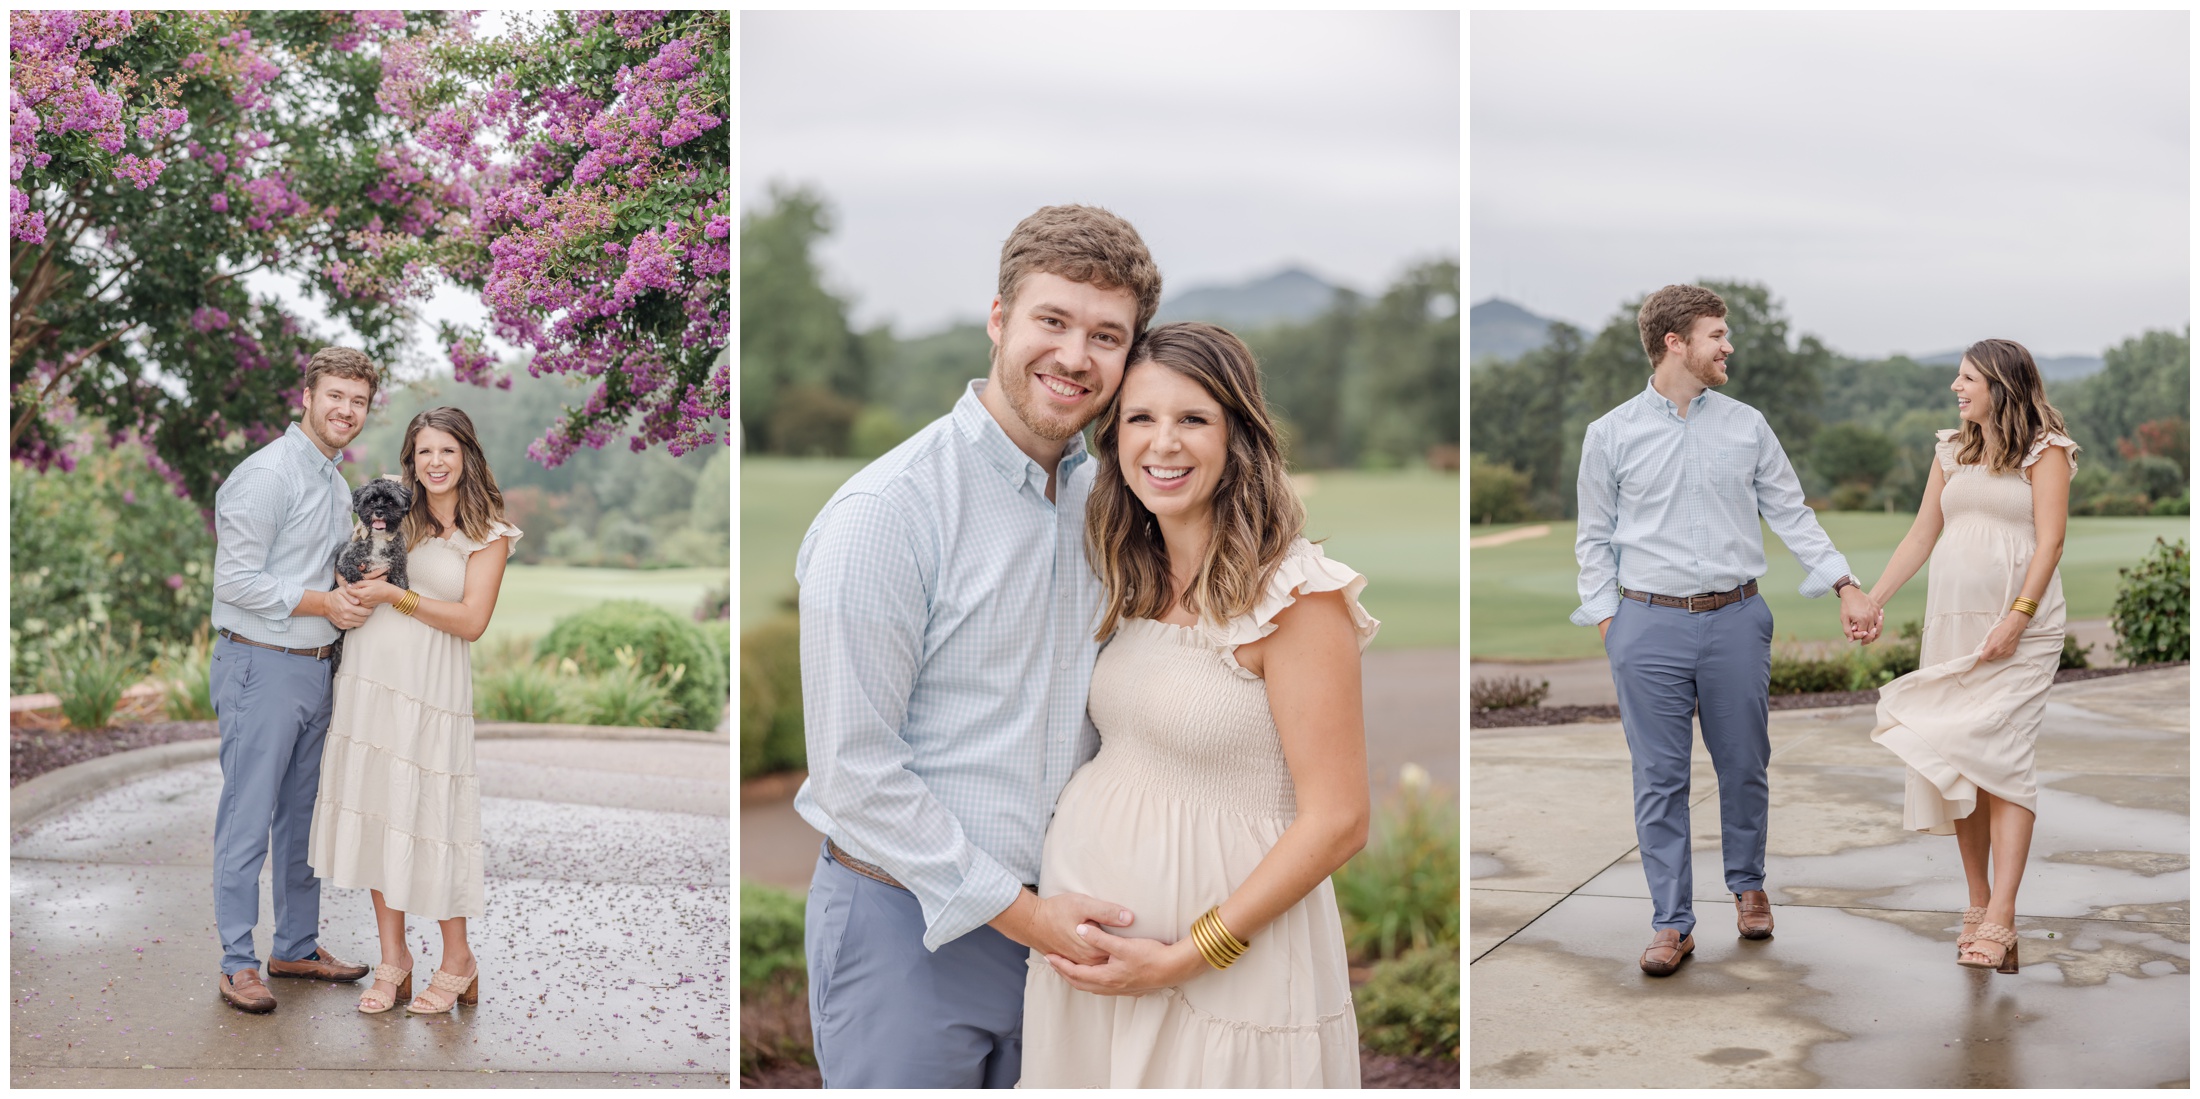 Three photo collage of a couple during maternity portrait session.